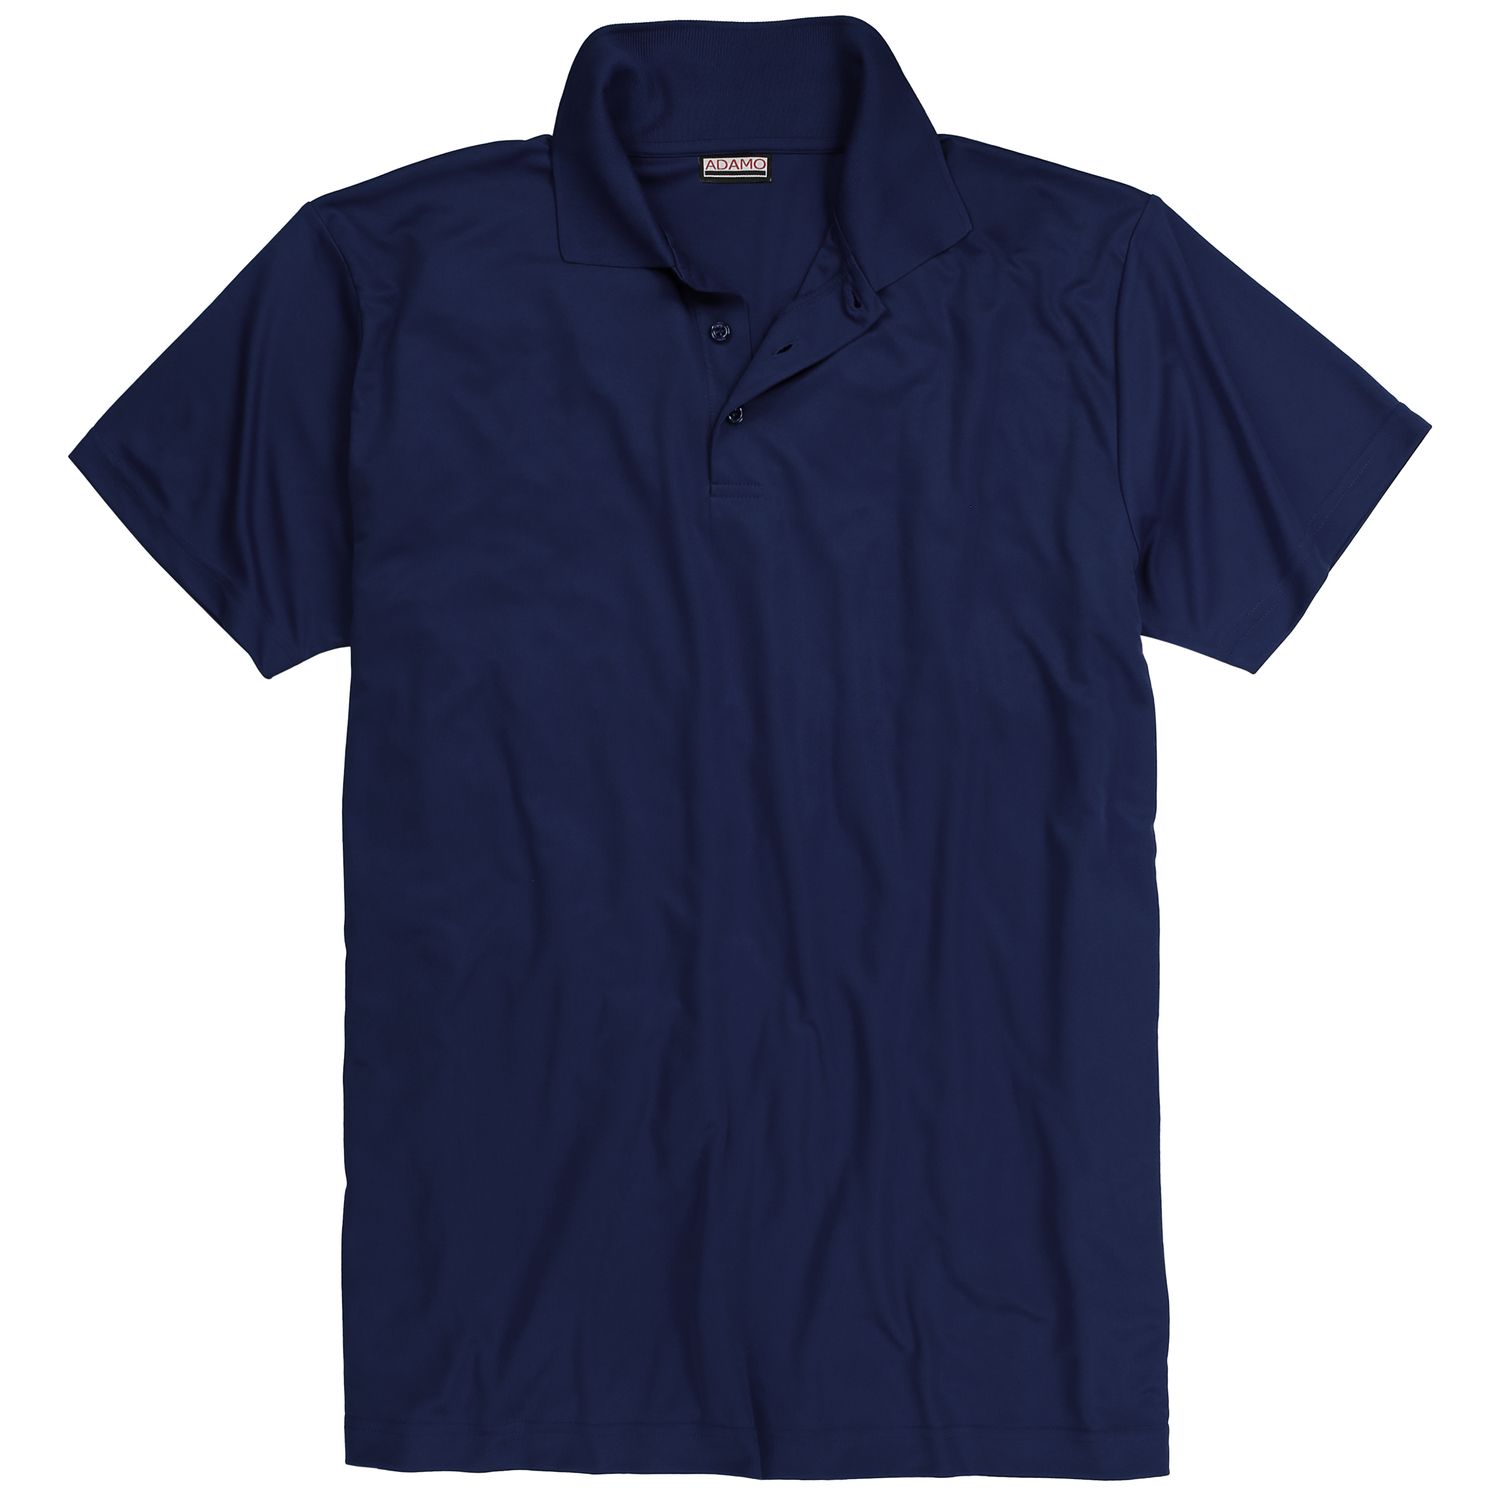 Short sleeve functional polo shirt series Marius COMFORT FIT by Adamo in navy up to oversize 12XL